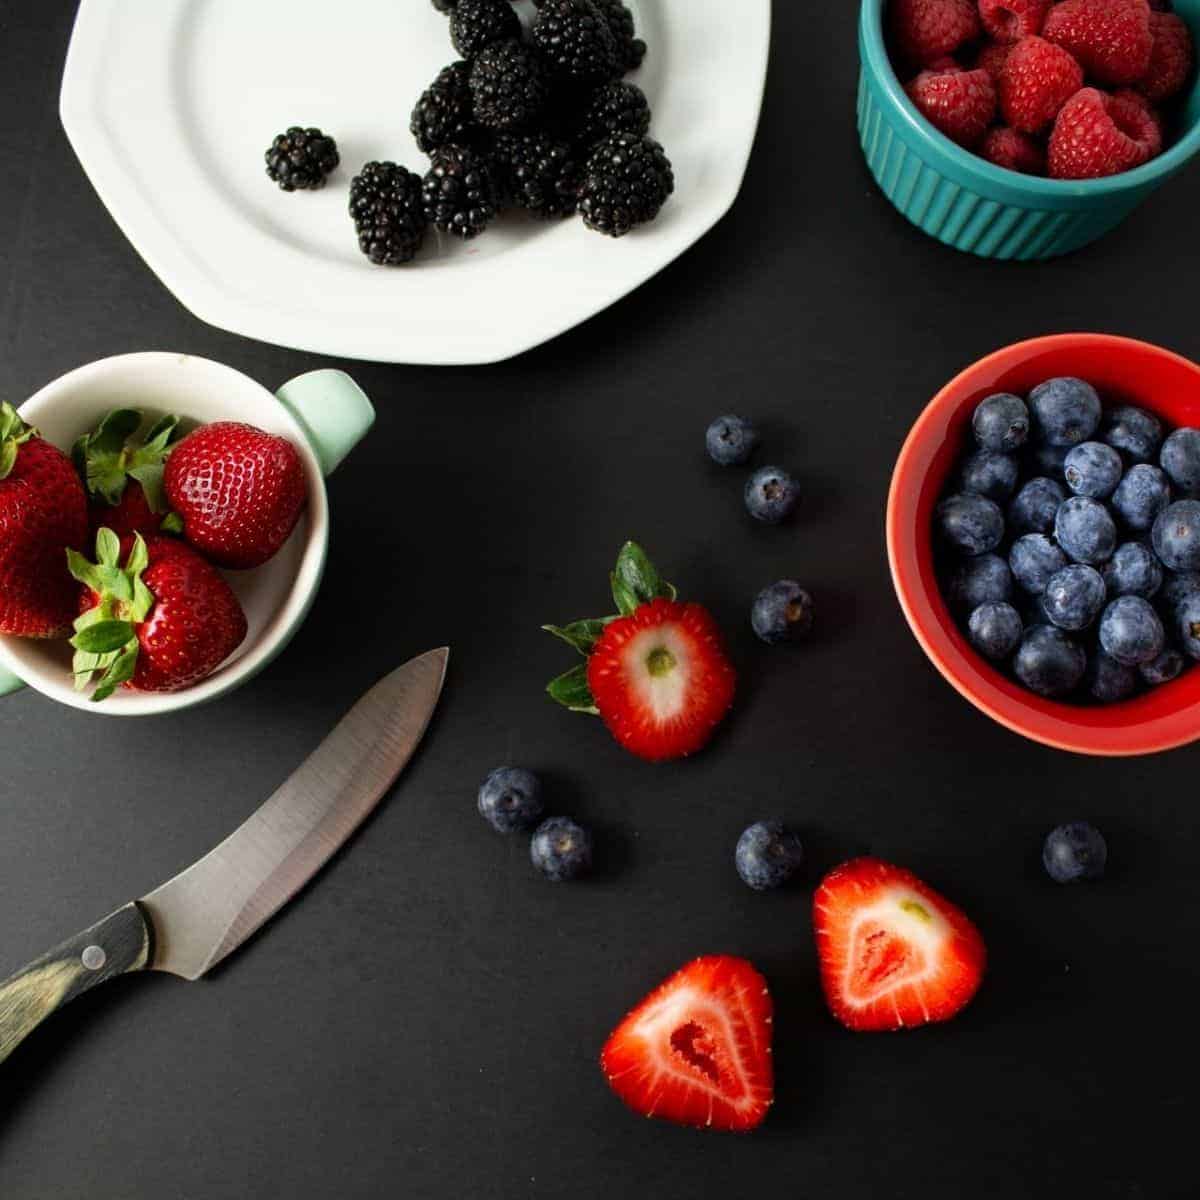 Use bowls and paper towels when storing berries to keep them fresh longer